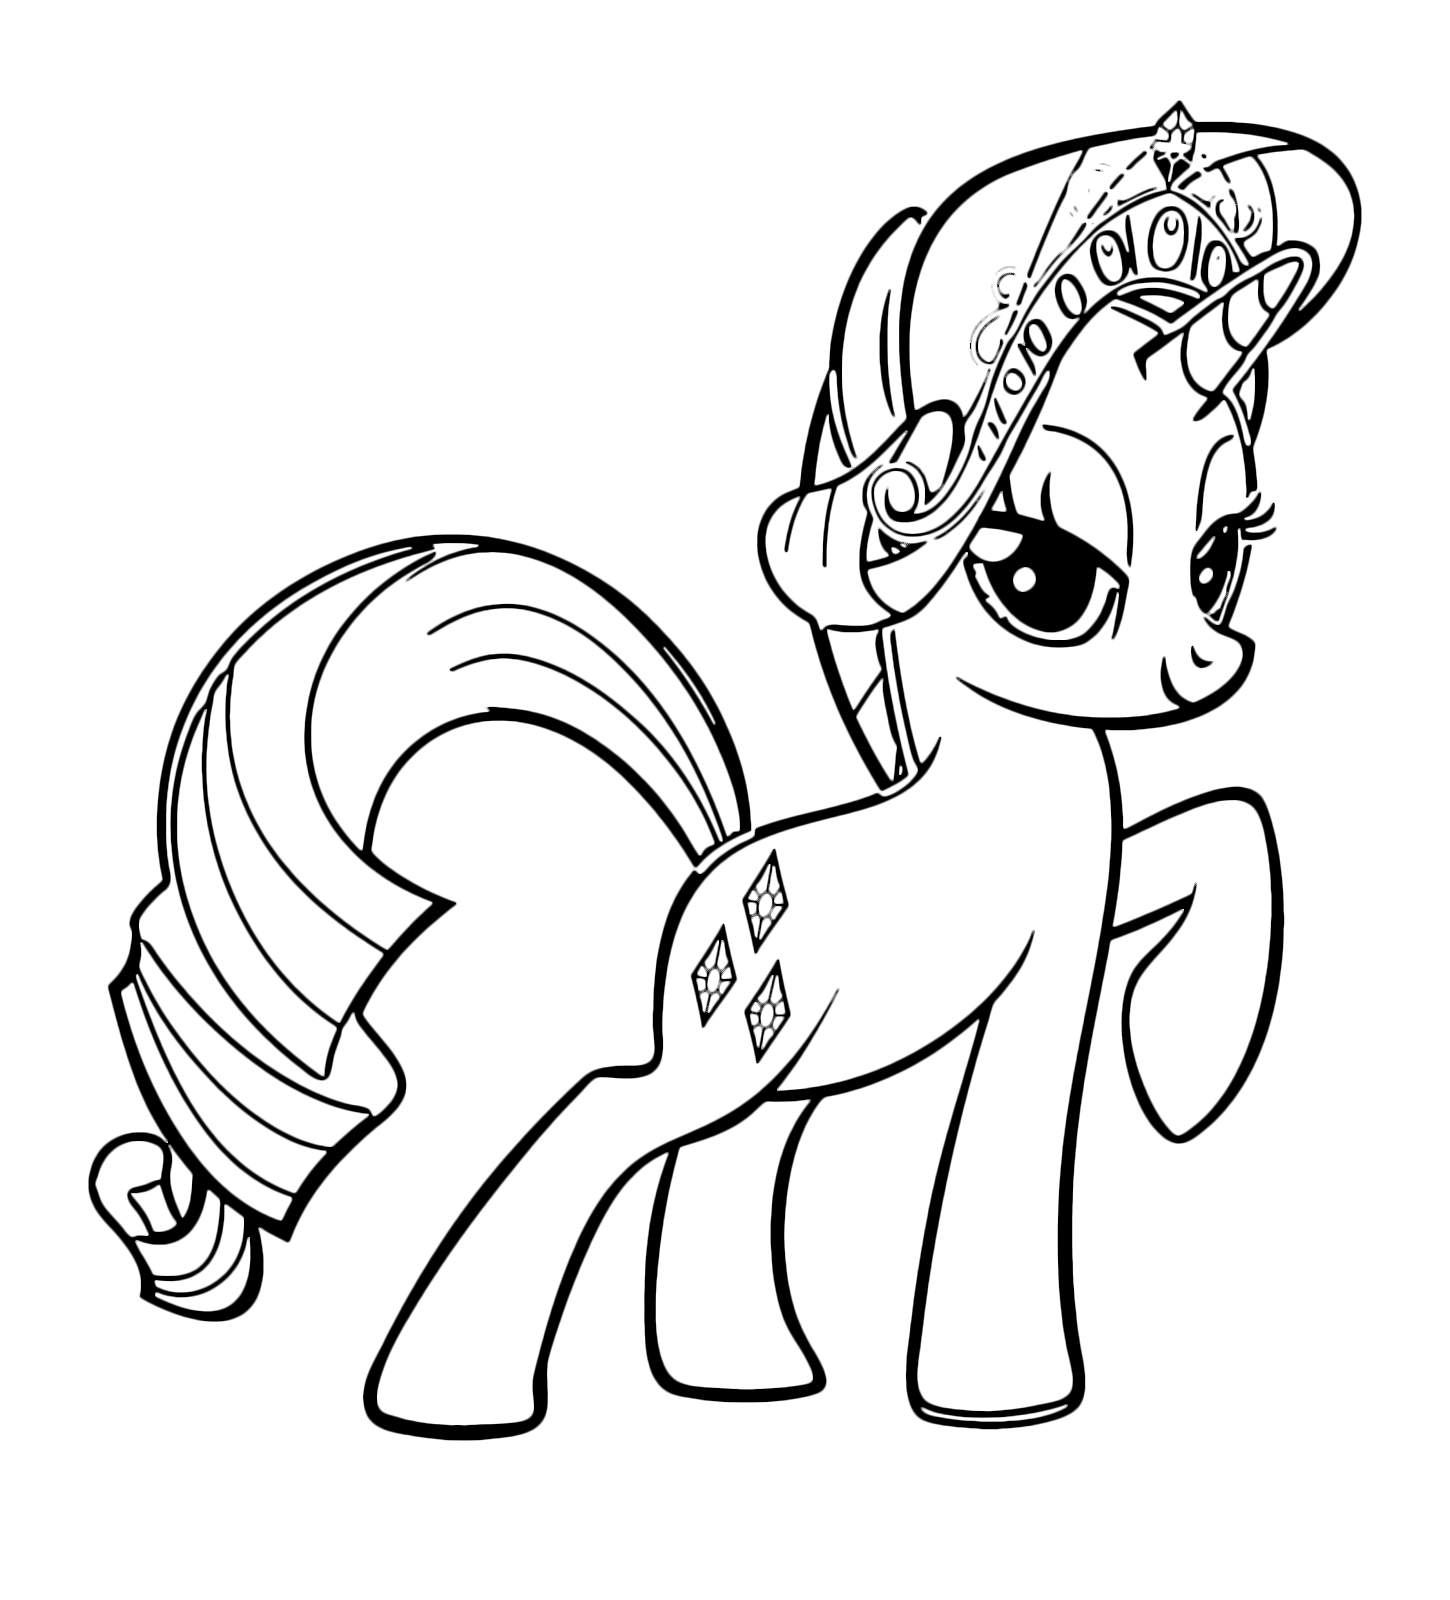 My Little Pony - Rarity with the crown between the thick broom